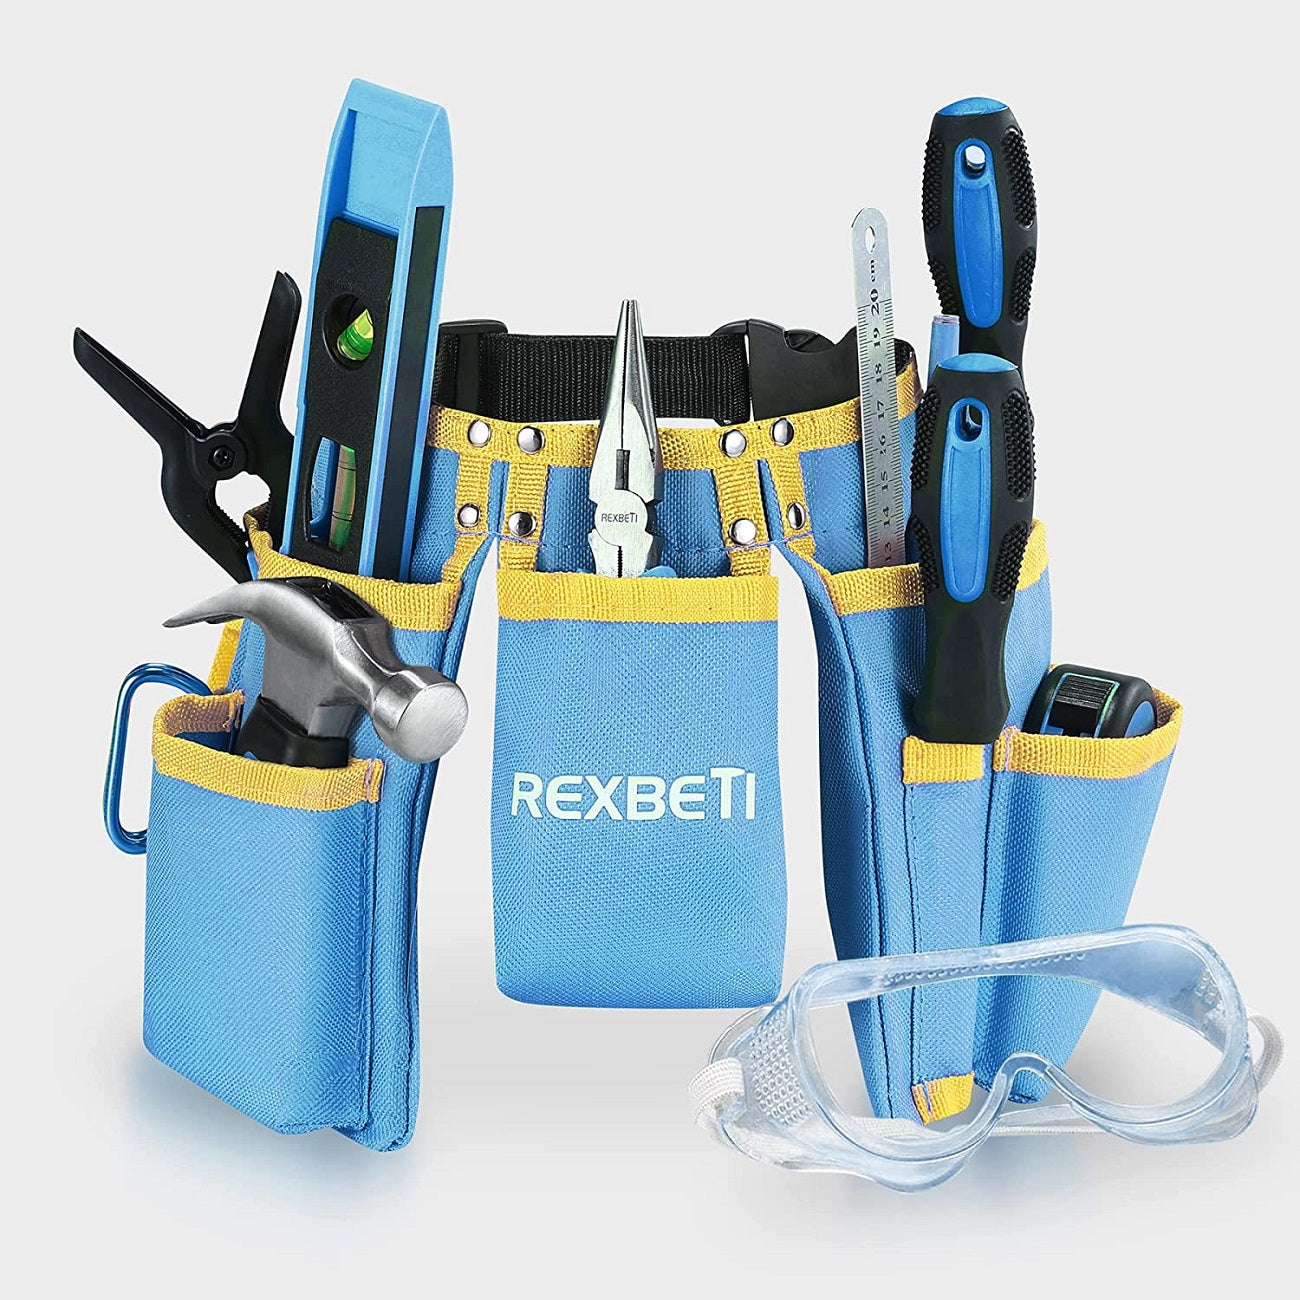 REXBETI 18pcs Blue Young Builder's Tool Set with Real Hand Tools, Rein